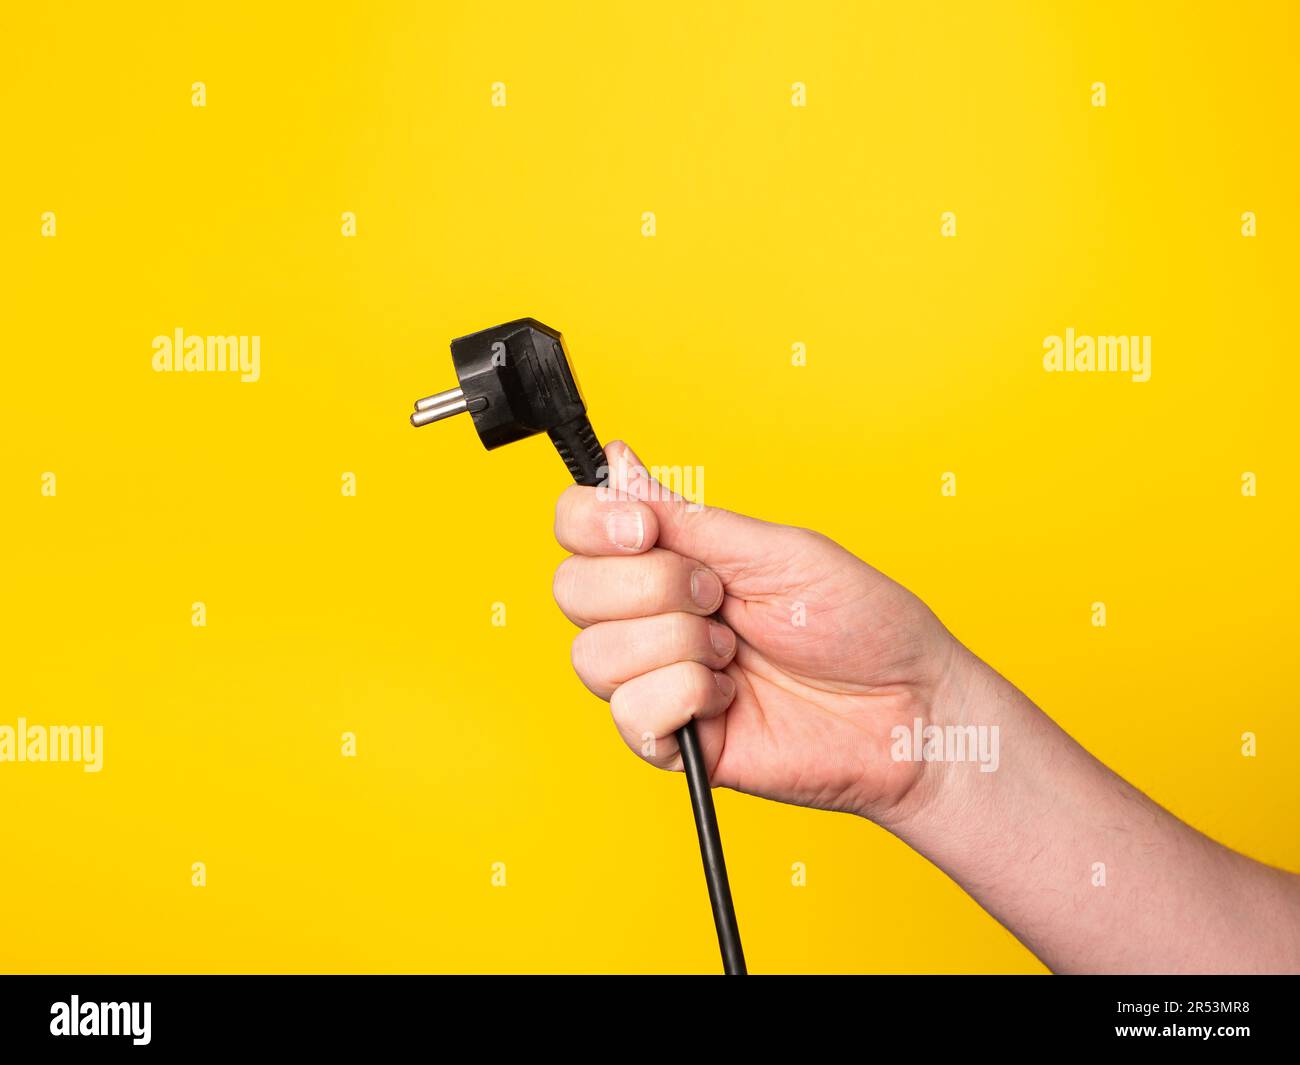 A hand holds a plug to which a black cable is attached.  No face, yellow background. Stock Photo